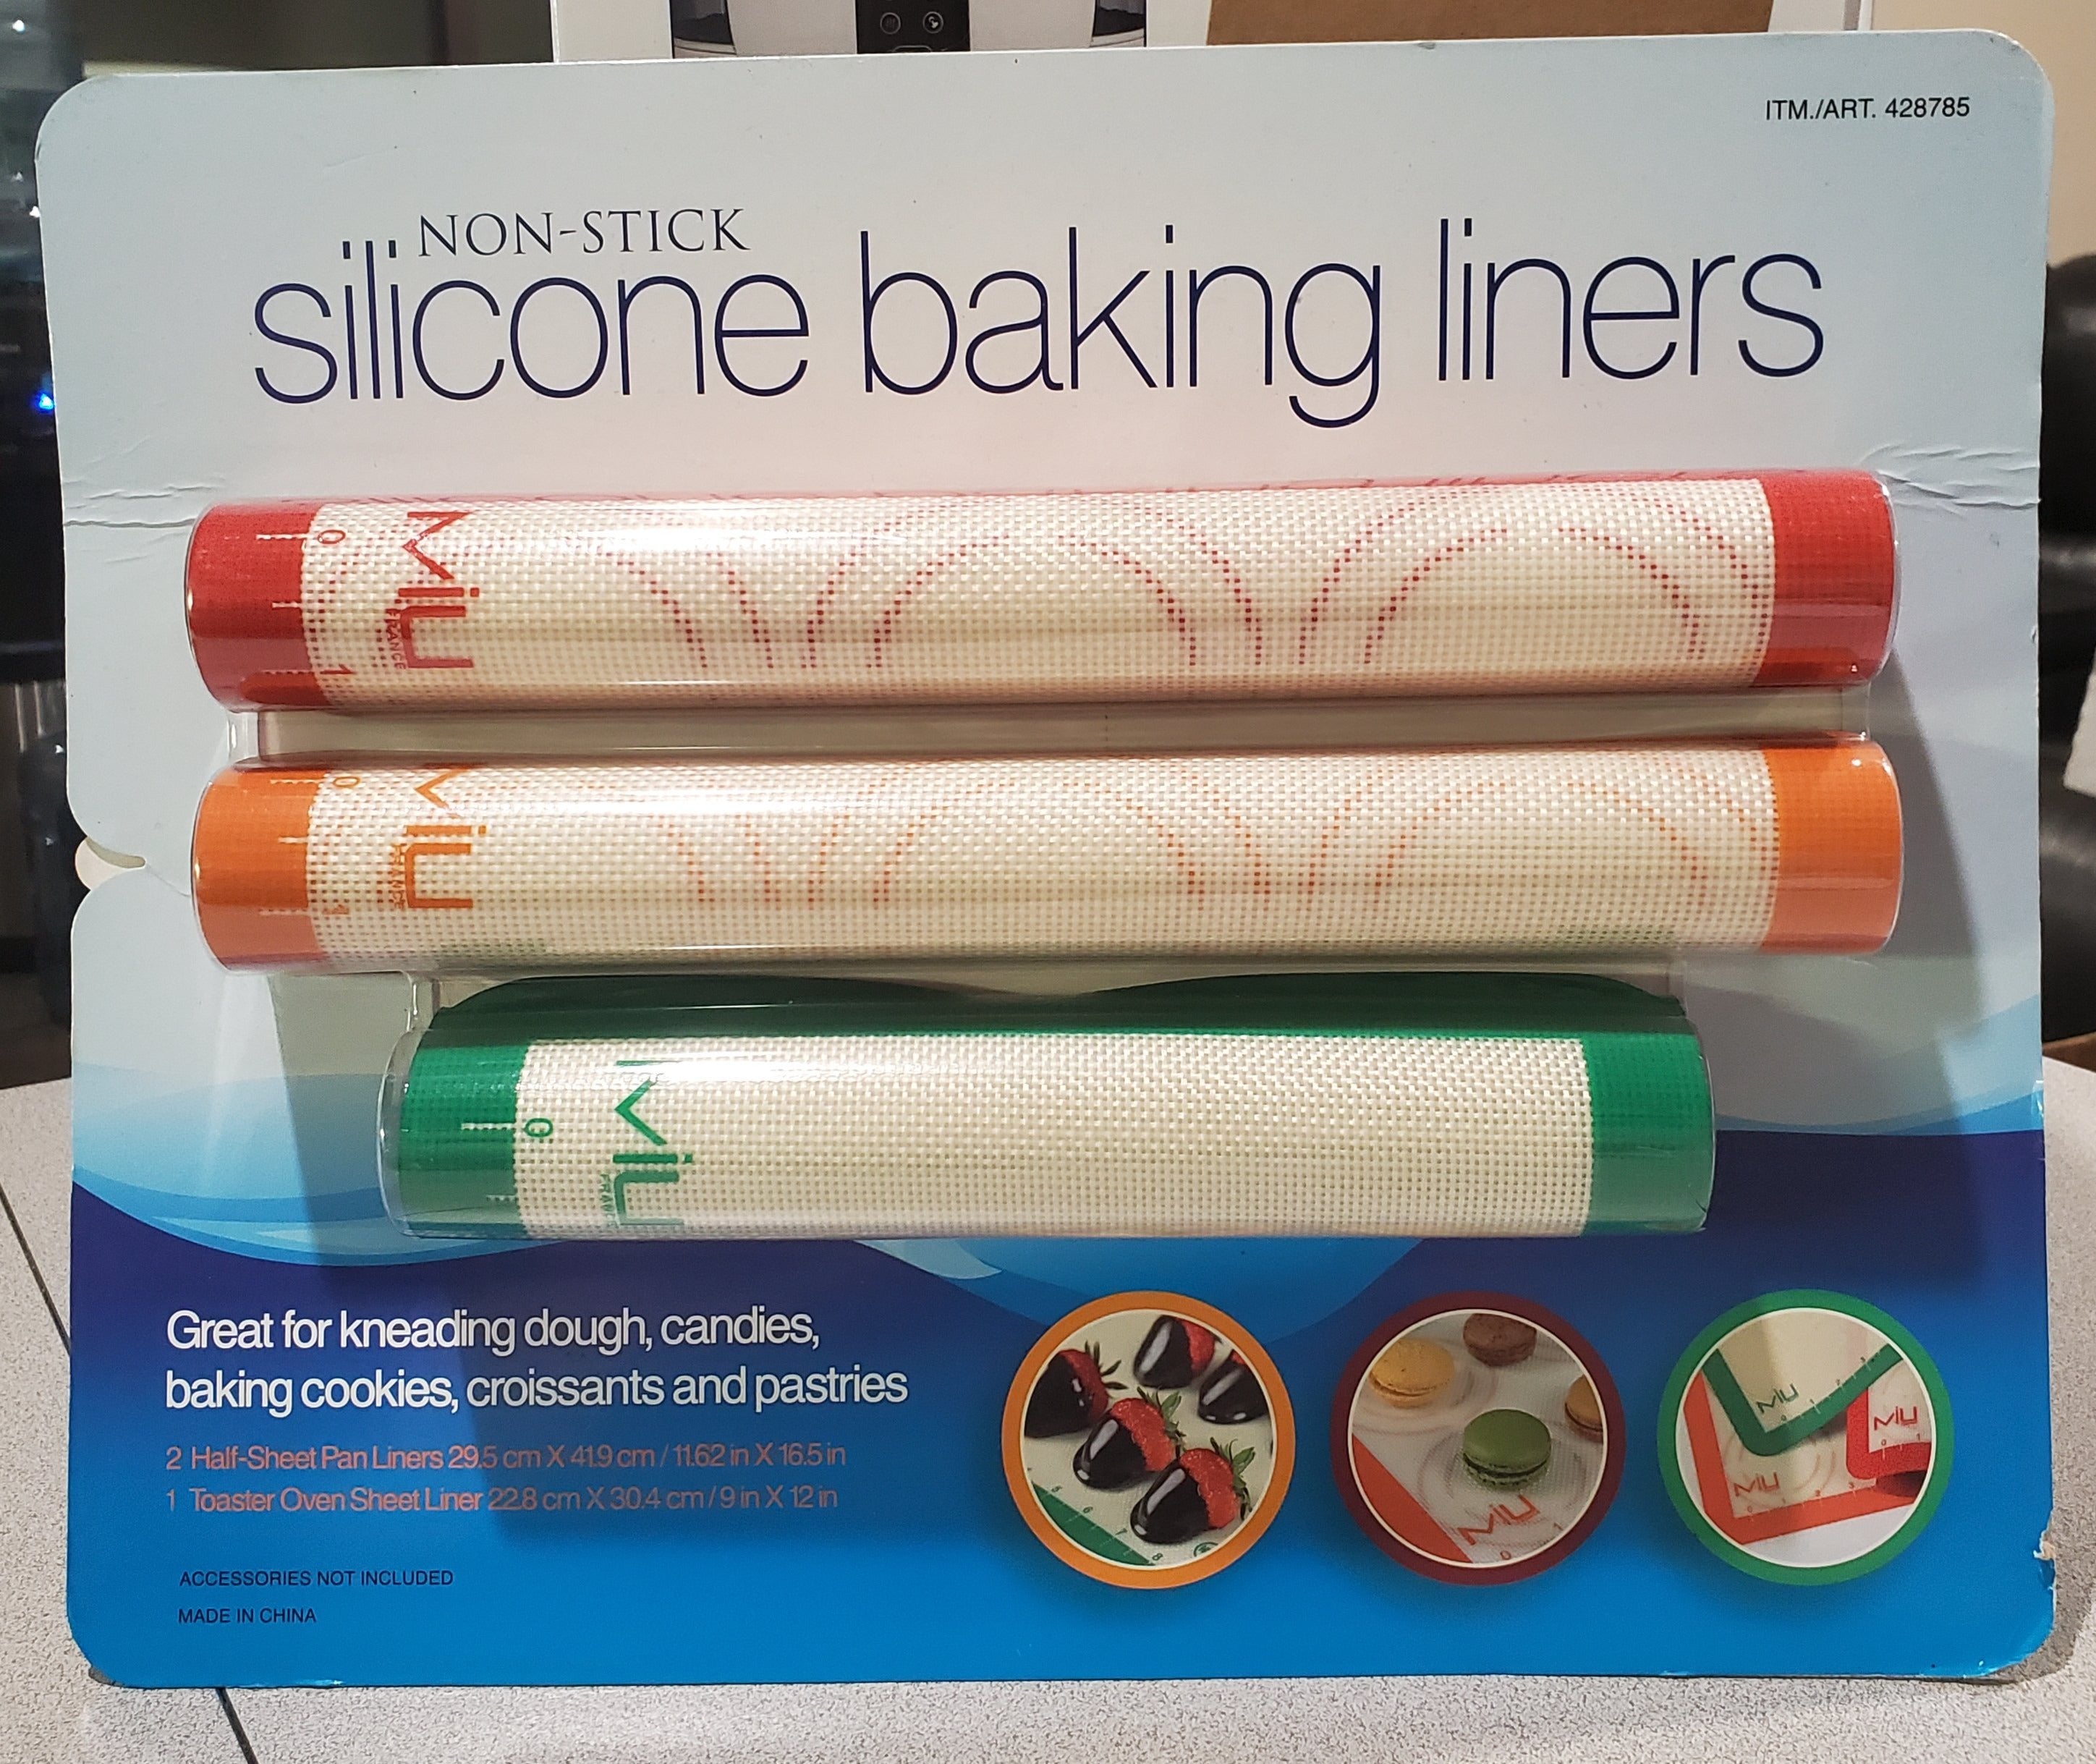 MIU France Three Silicone Baking Liners 2 Cookie Sheets, 1 Toaster Oven  Size